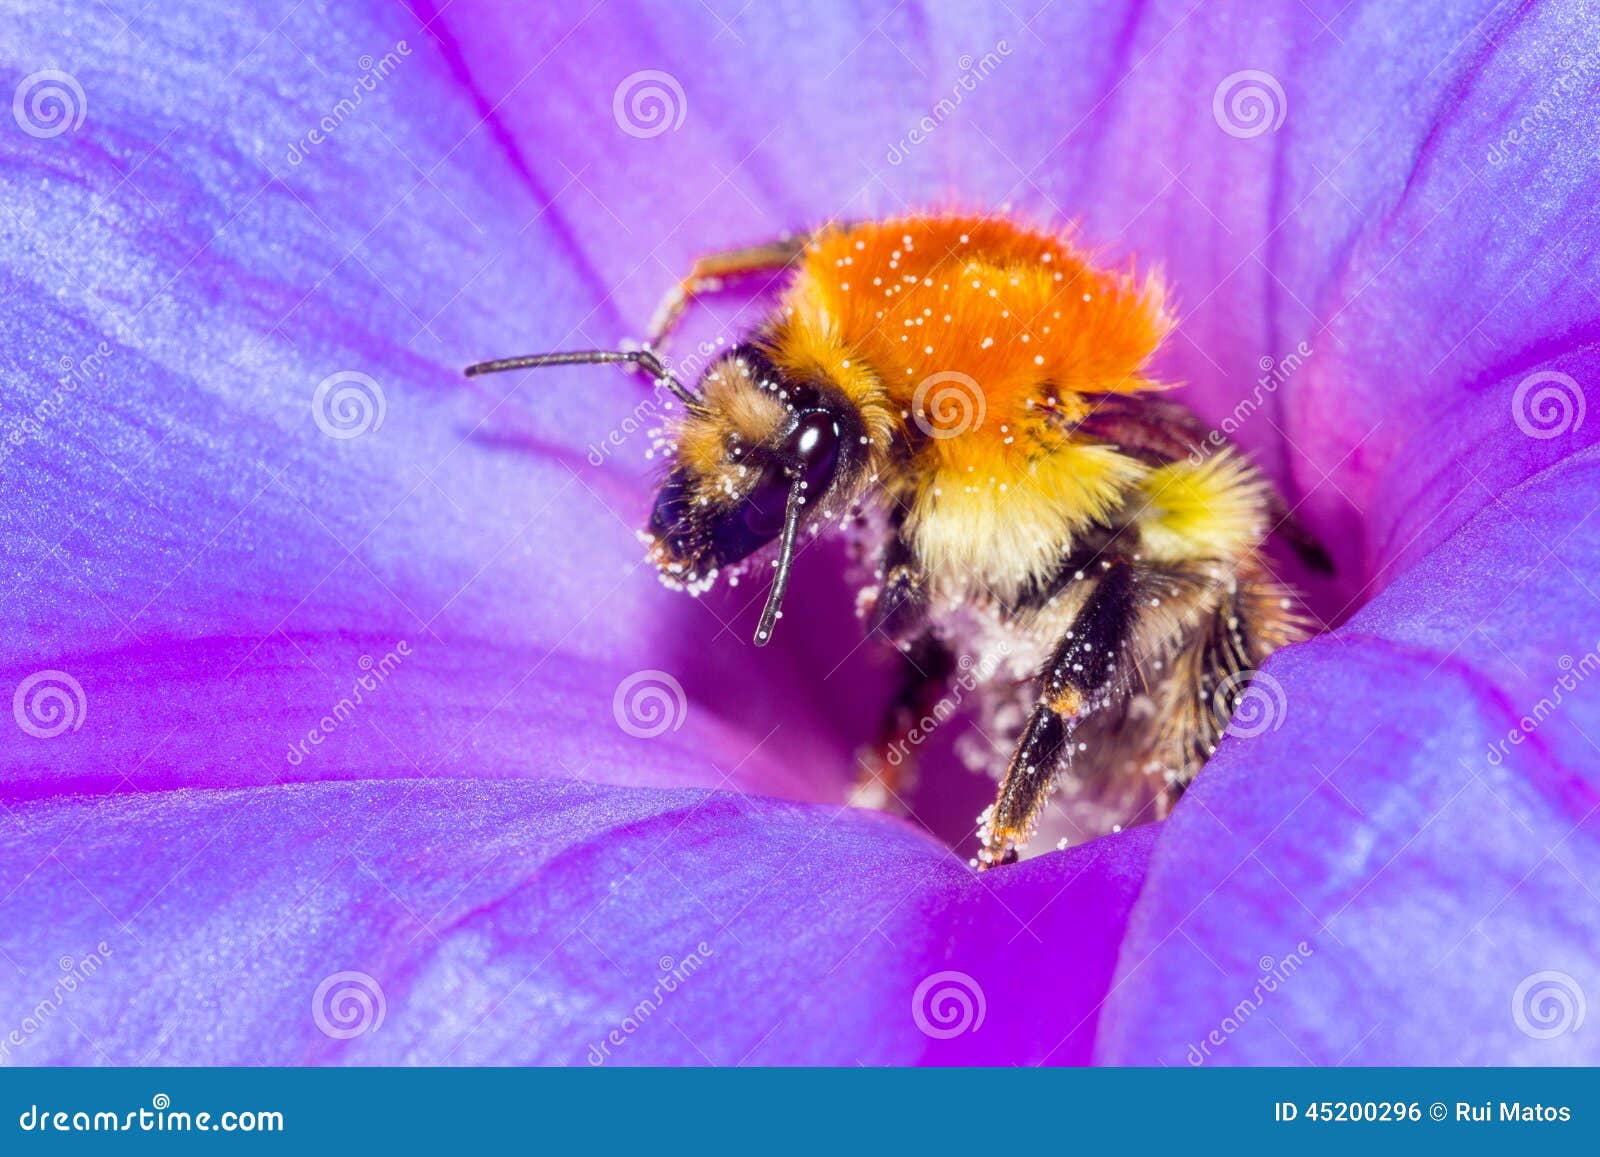 honey bee and flower pollination